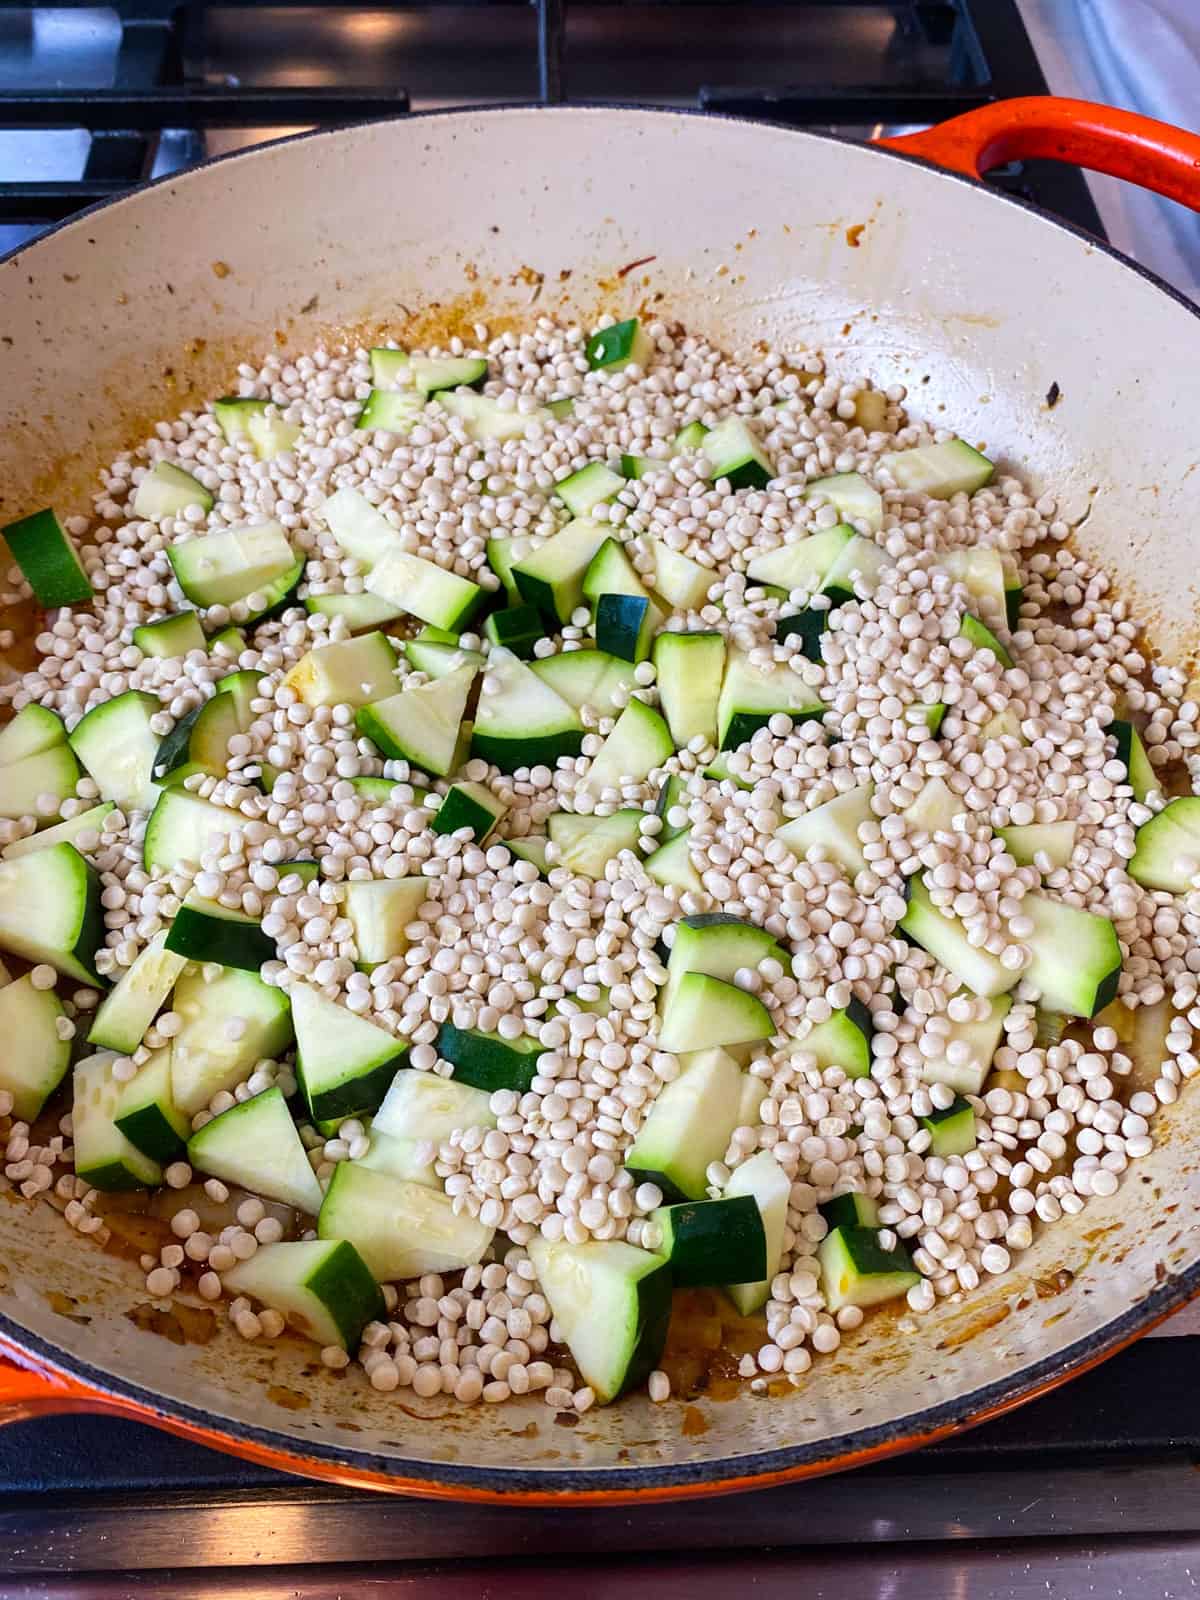 Add the Israeli couscous and chopped zucchini.